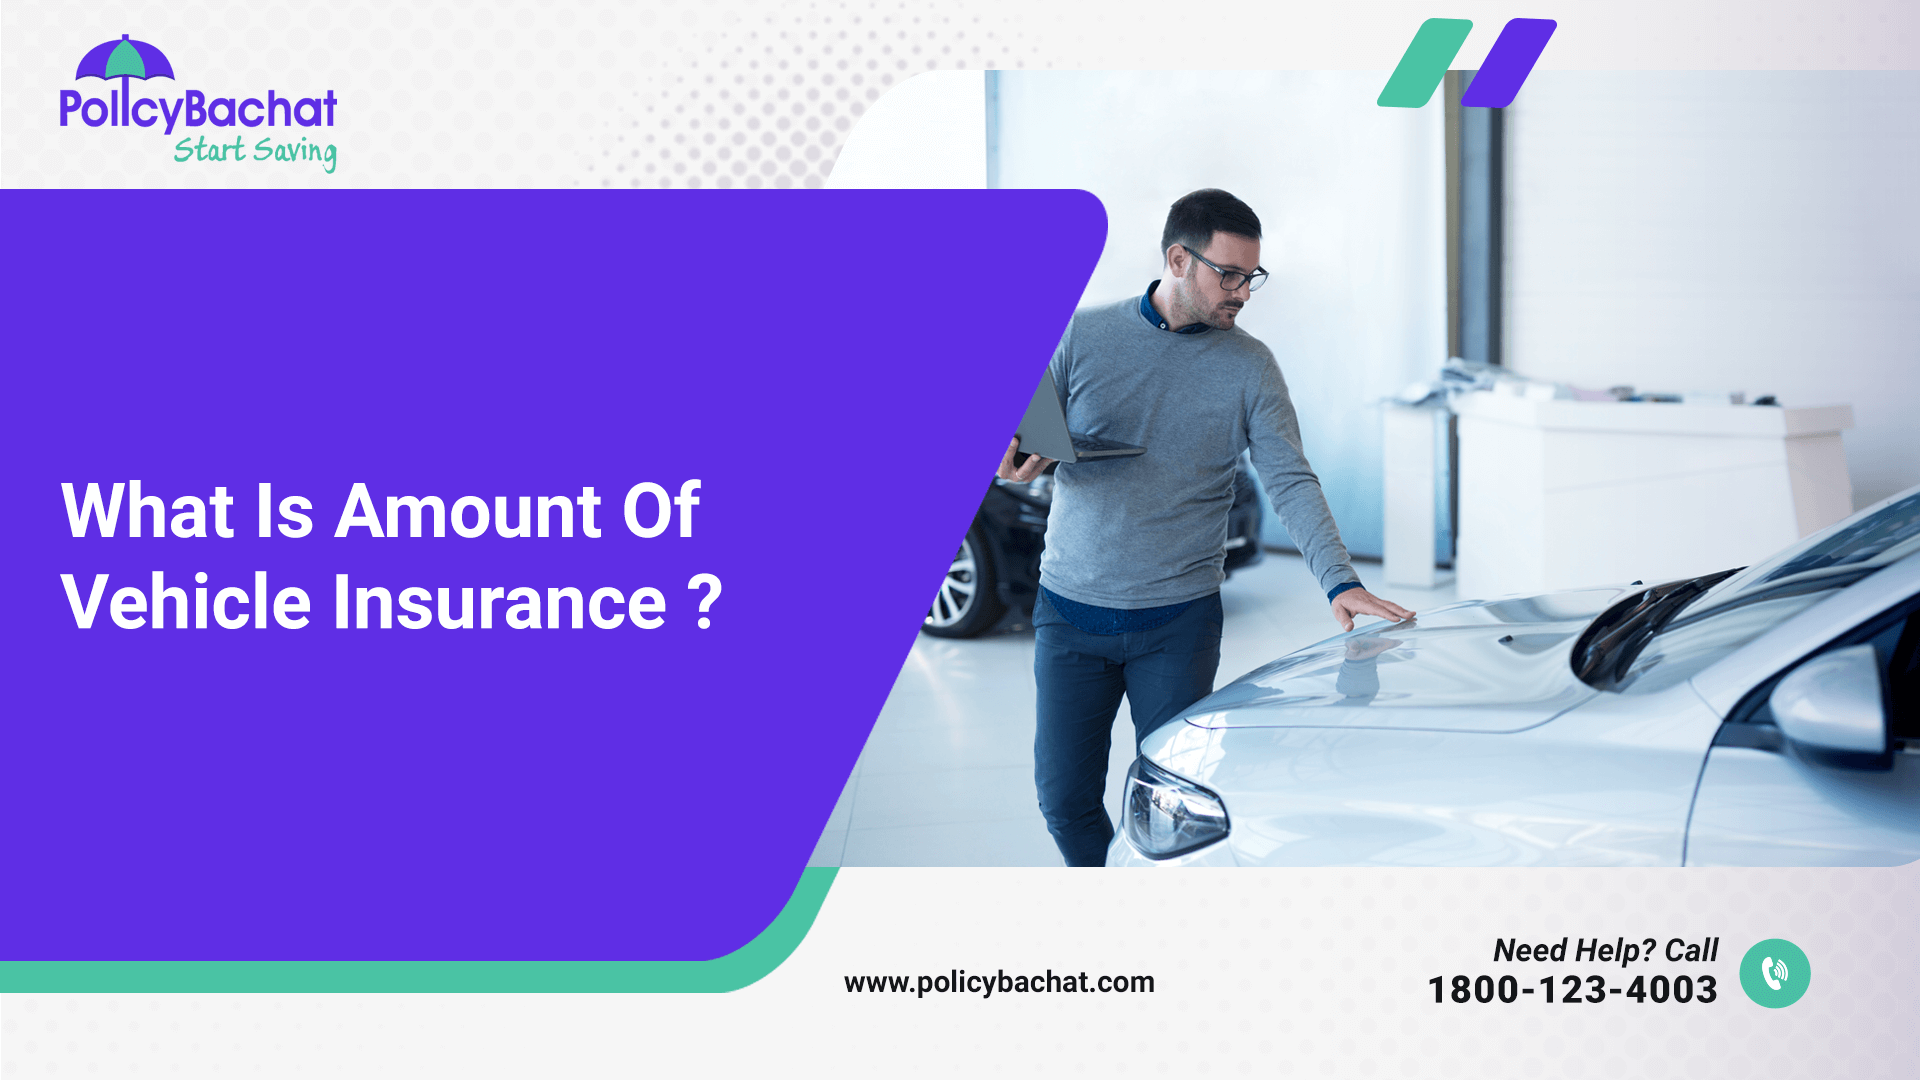 What Is Amount Of Vehicle Insurance? PolicyBachat